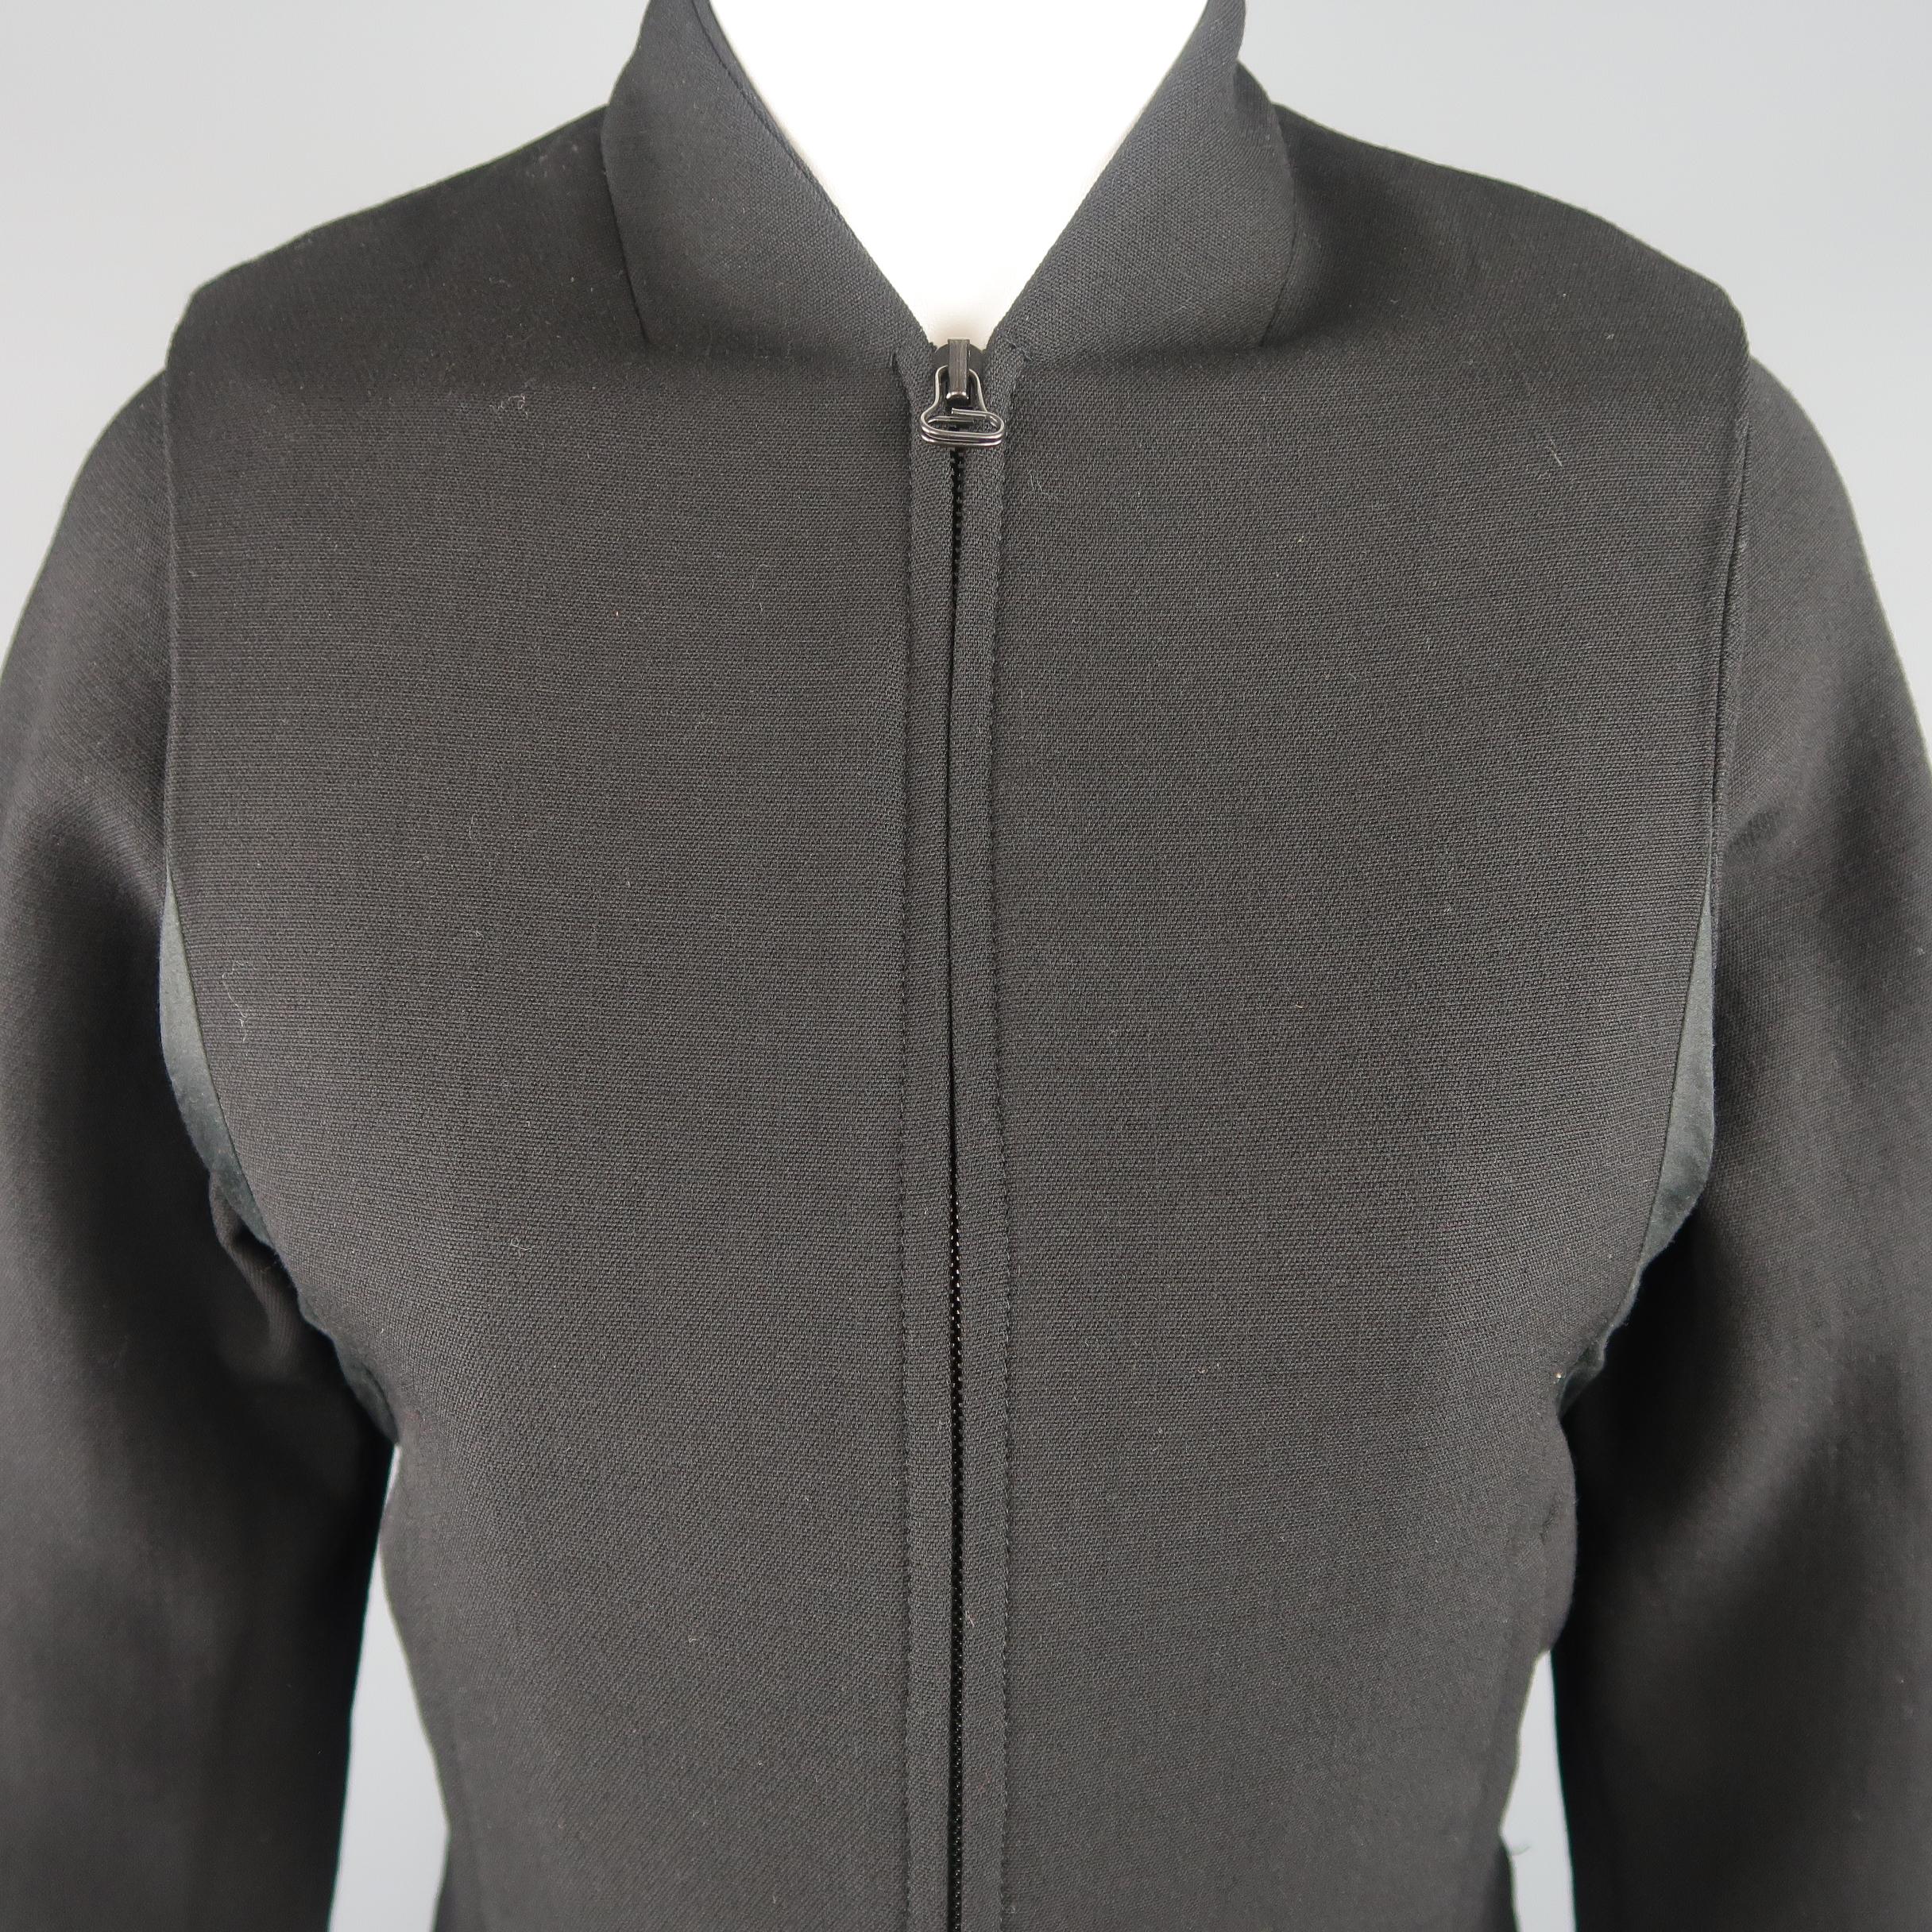 HELMUT LANG baseball jacket comes in black wool blend fabric with a simulated baseball collar, zip front, slit pockets, and vest overlay panel.
 
Excellent Pre-Owned Condition.
Marked: P
 
Measurements:
 
Shoulder: 14 in.
Bust: 33 in.
Sleeve: 25